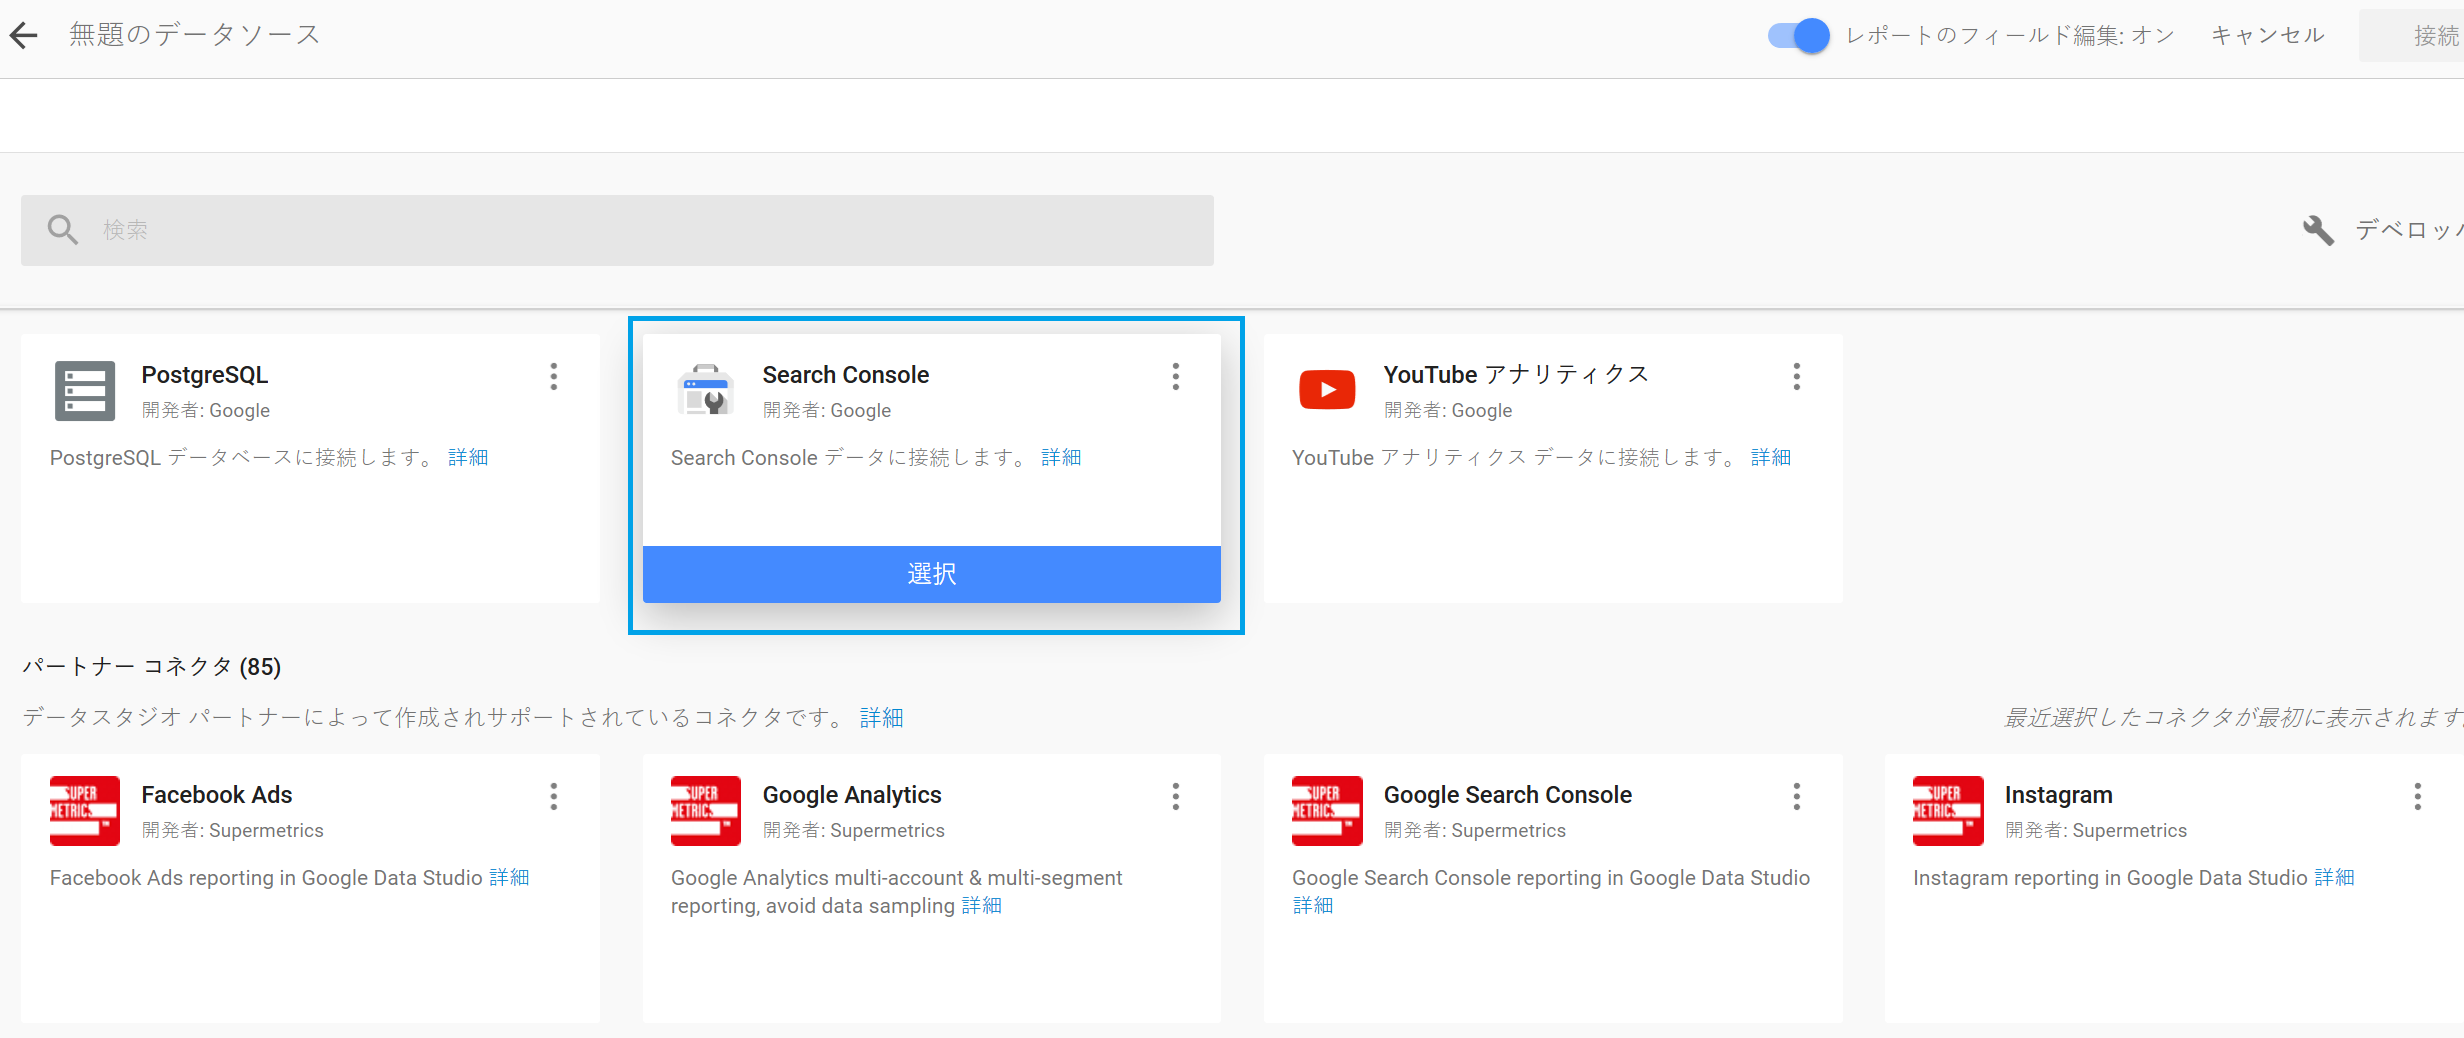 Search Consoleコネクタを選択